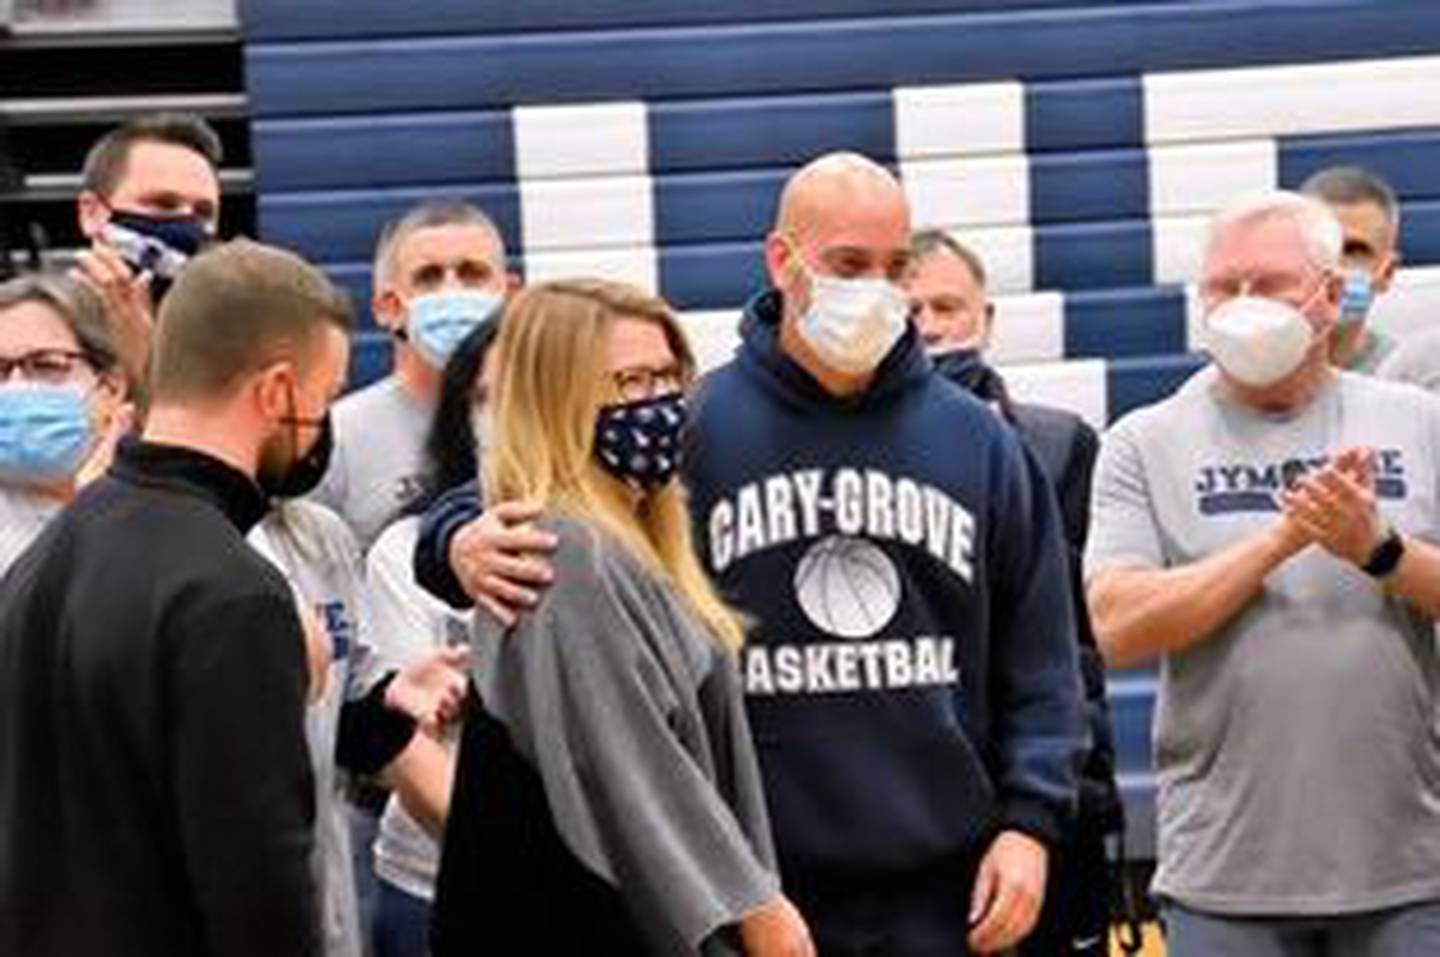 Cary-Grove athletic director Jim Altendorf and his wife Lauralee. "She's been amazingly supportive of me," said Altendorf, who is retiring as AD after this school year.